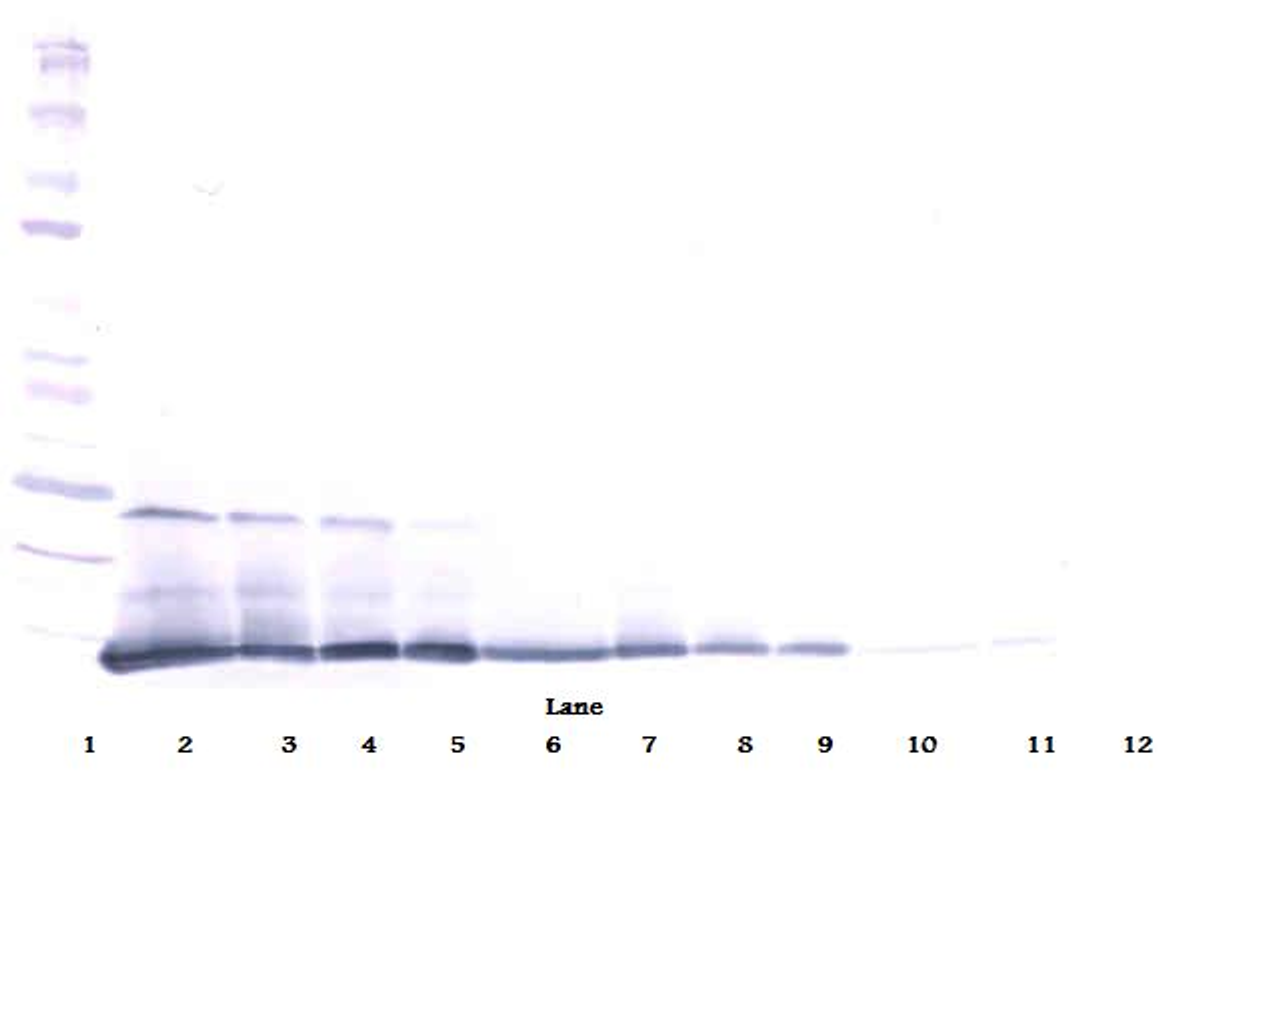 To detect Murine IL-5 by Western Blot analysis this antibody can be used at a concentration of 0.1 - 0.2 ug/ml. When used in conjunction with compatible secondary reagents, the detection limit for recombinant Murine IL-5 is 1.5 - 3.0 ng/lane, under either reducing or non-reducing conditions.